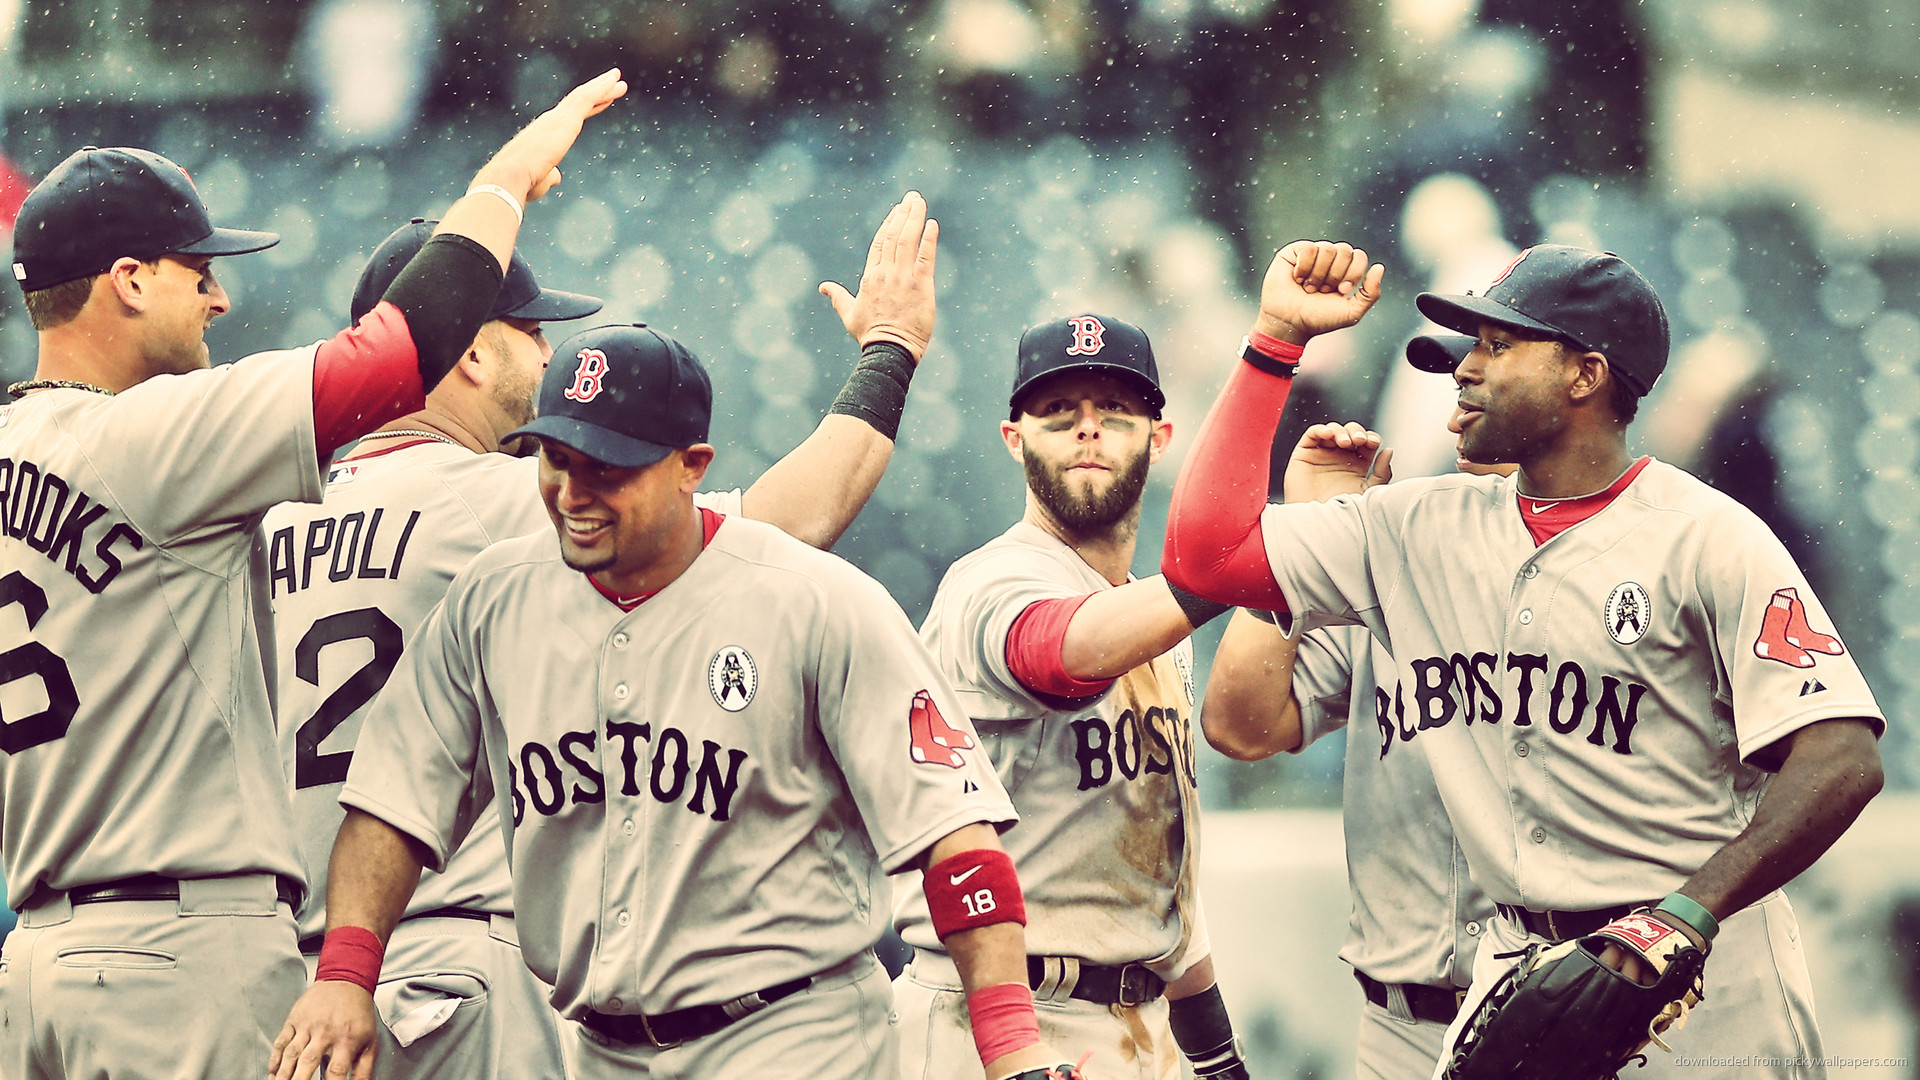 1920x1080 Red Sox Cheering in Rain picture